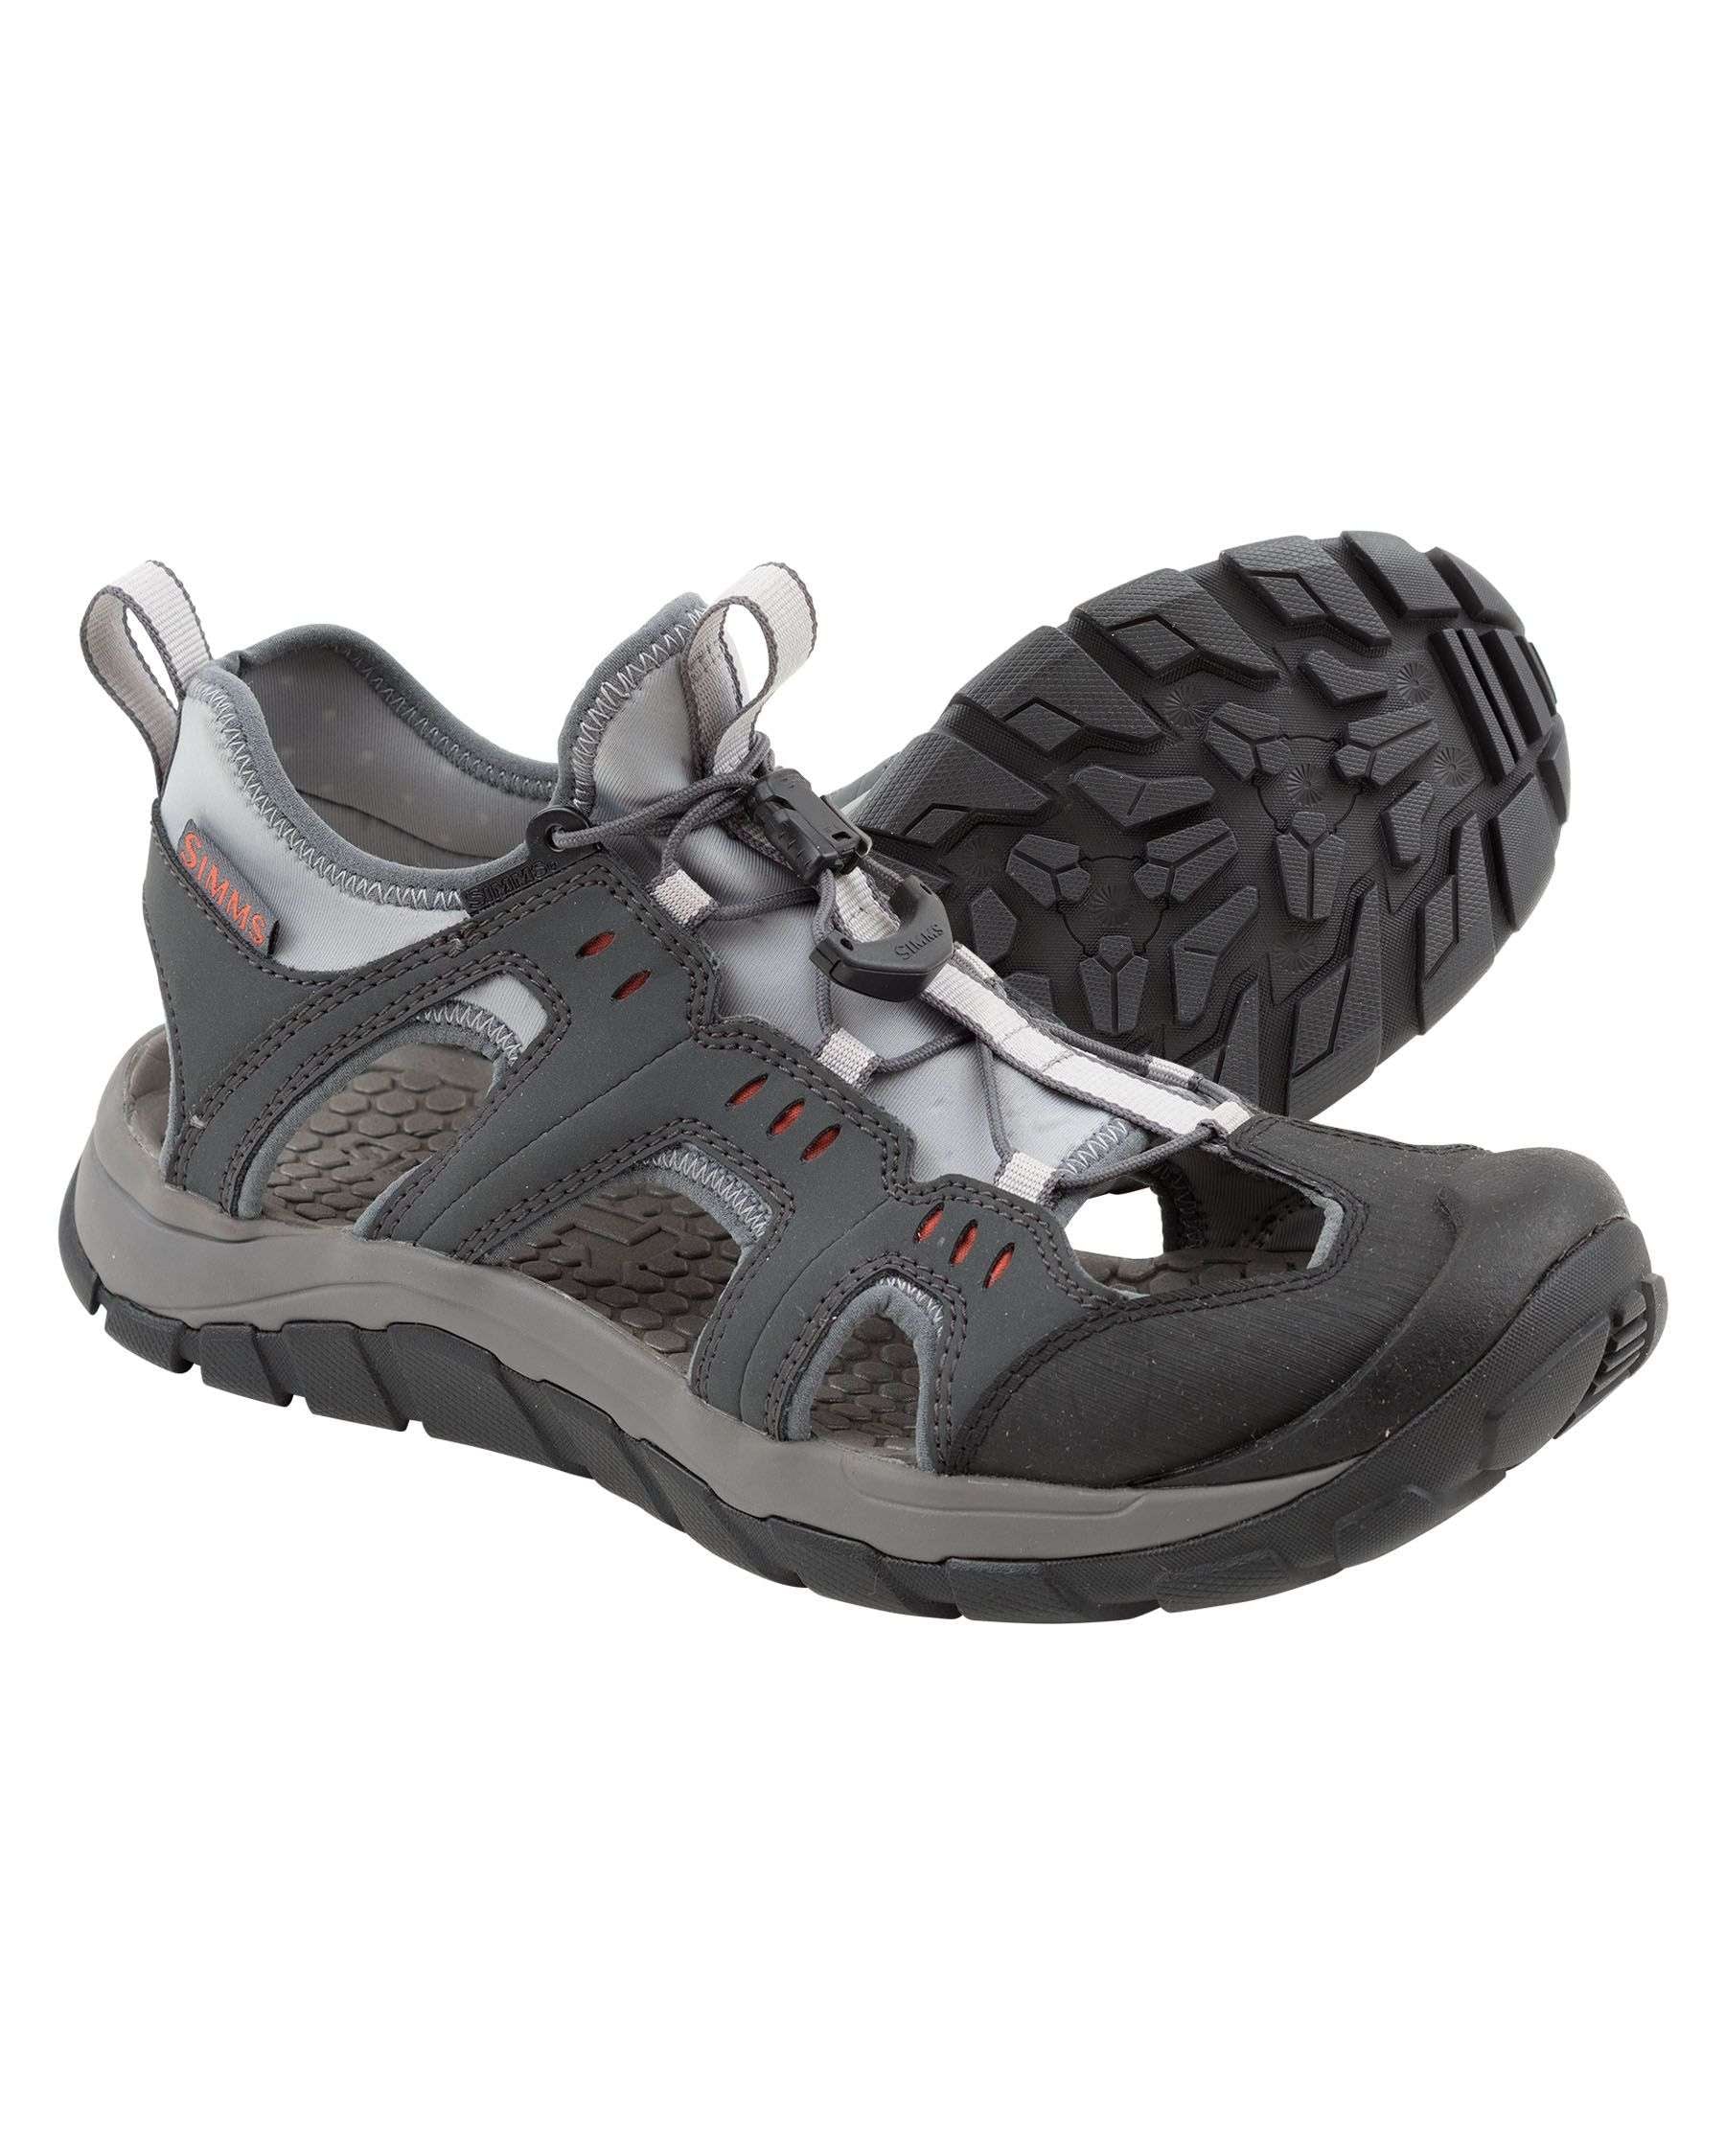 Simms Rip-Rap Wading Shoe for Year-Round Fishing – My Only Choice